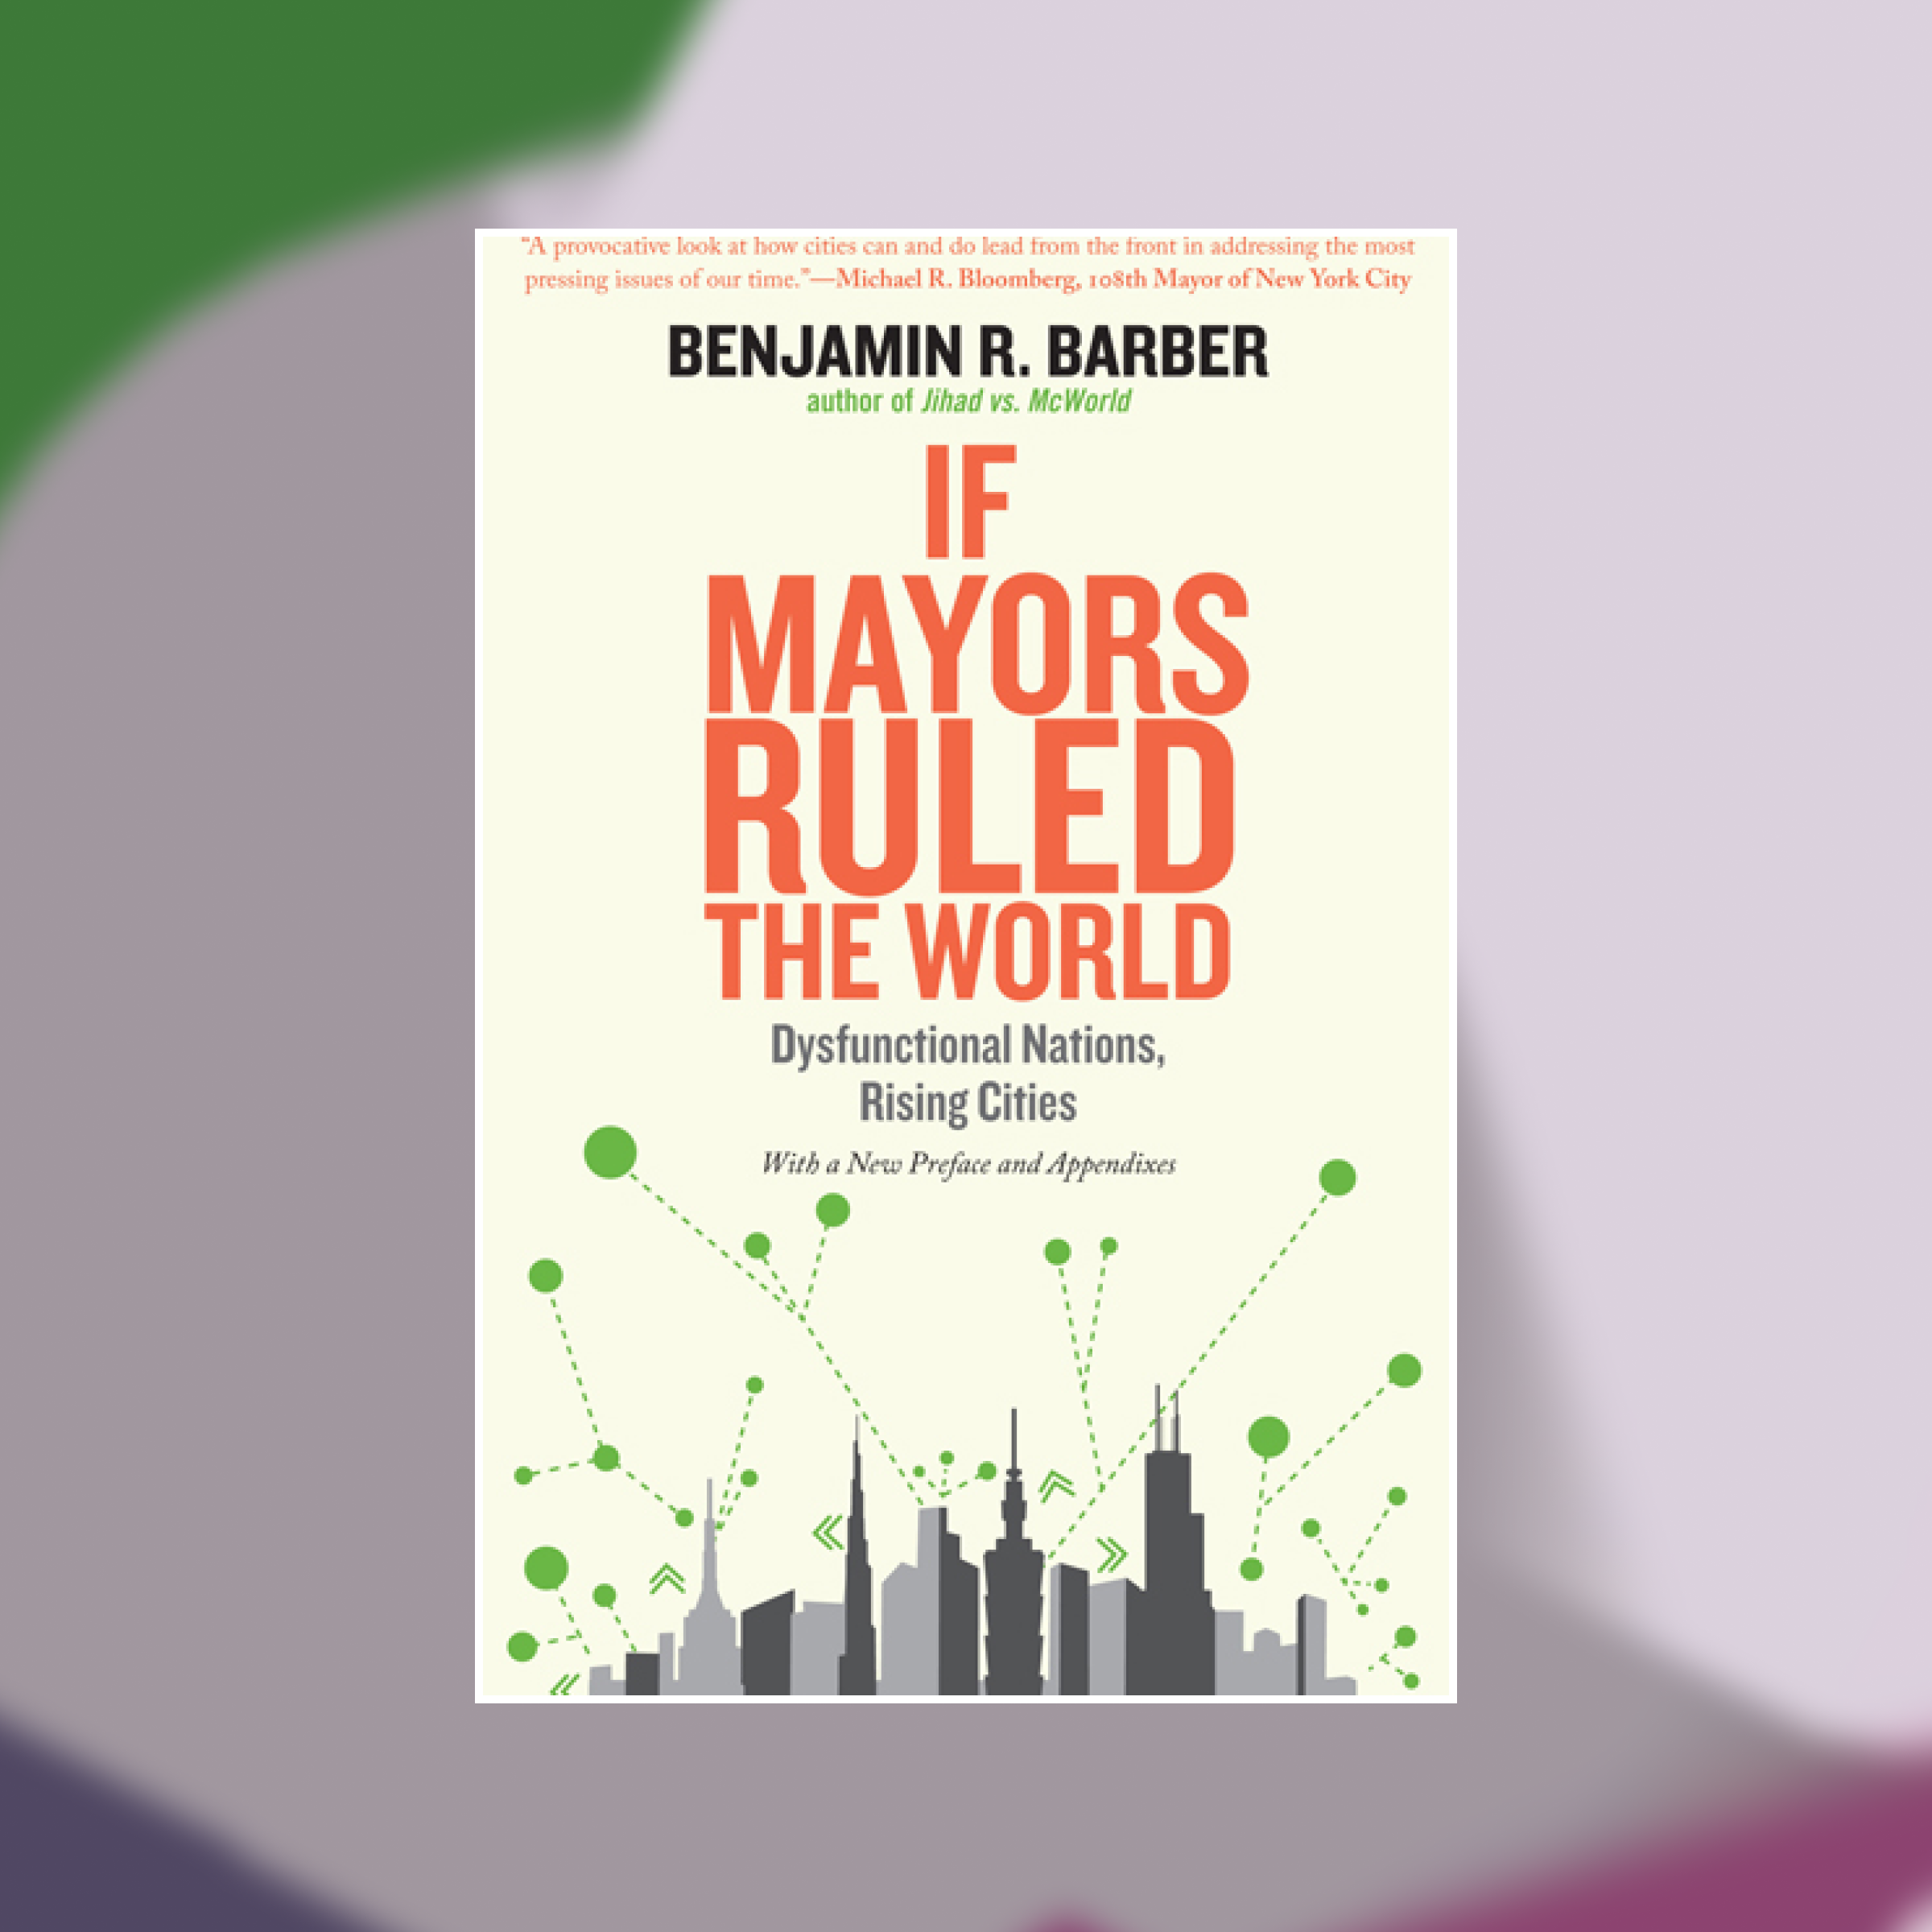 Book cover of If Mayors Ruled The World against an abstract painted background